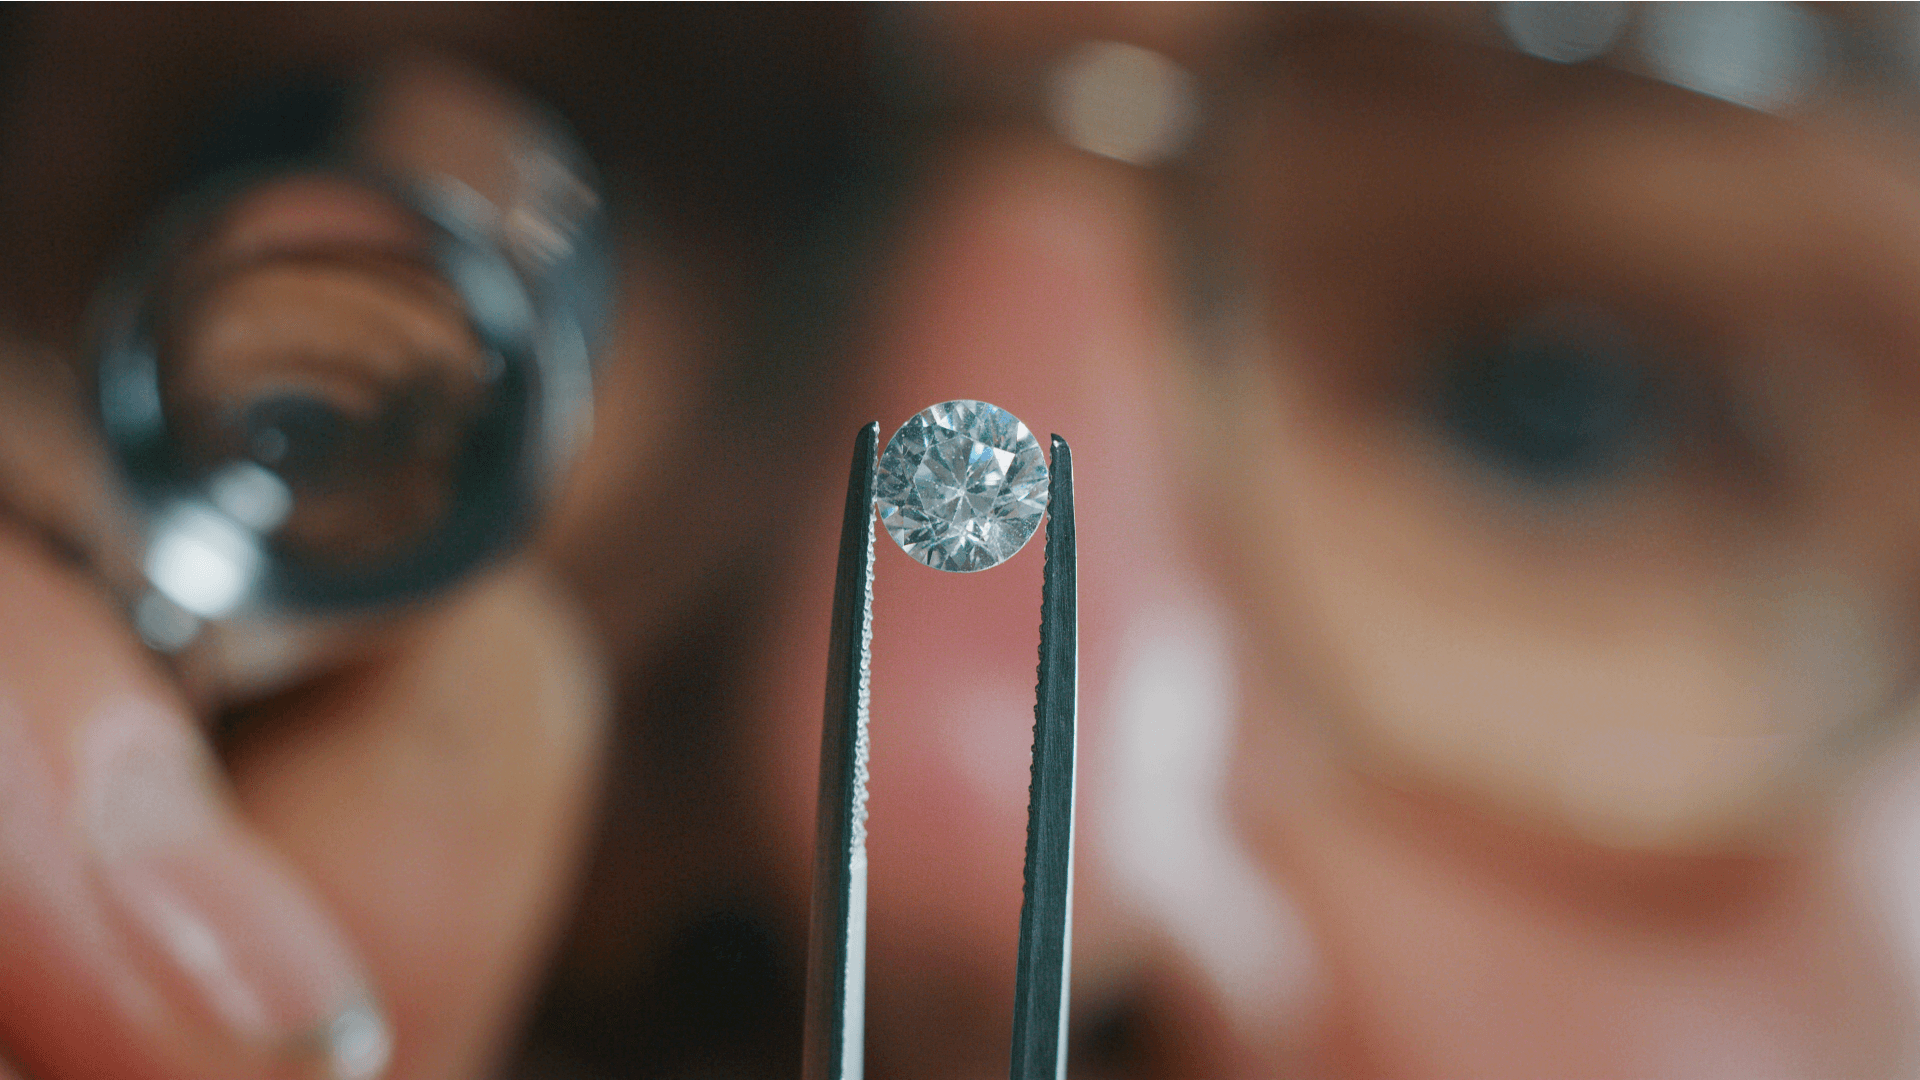 a scientist examines a diamond with tweezers in a lab